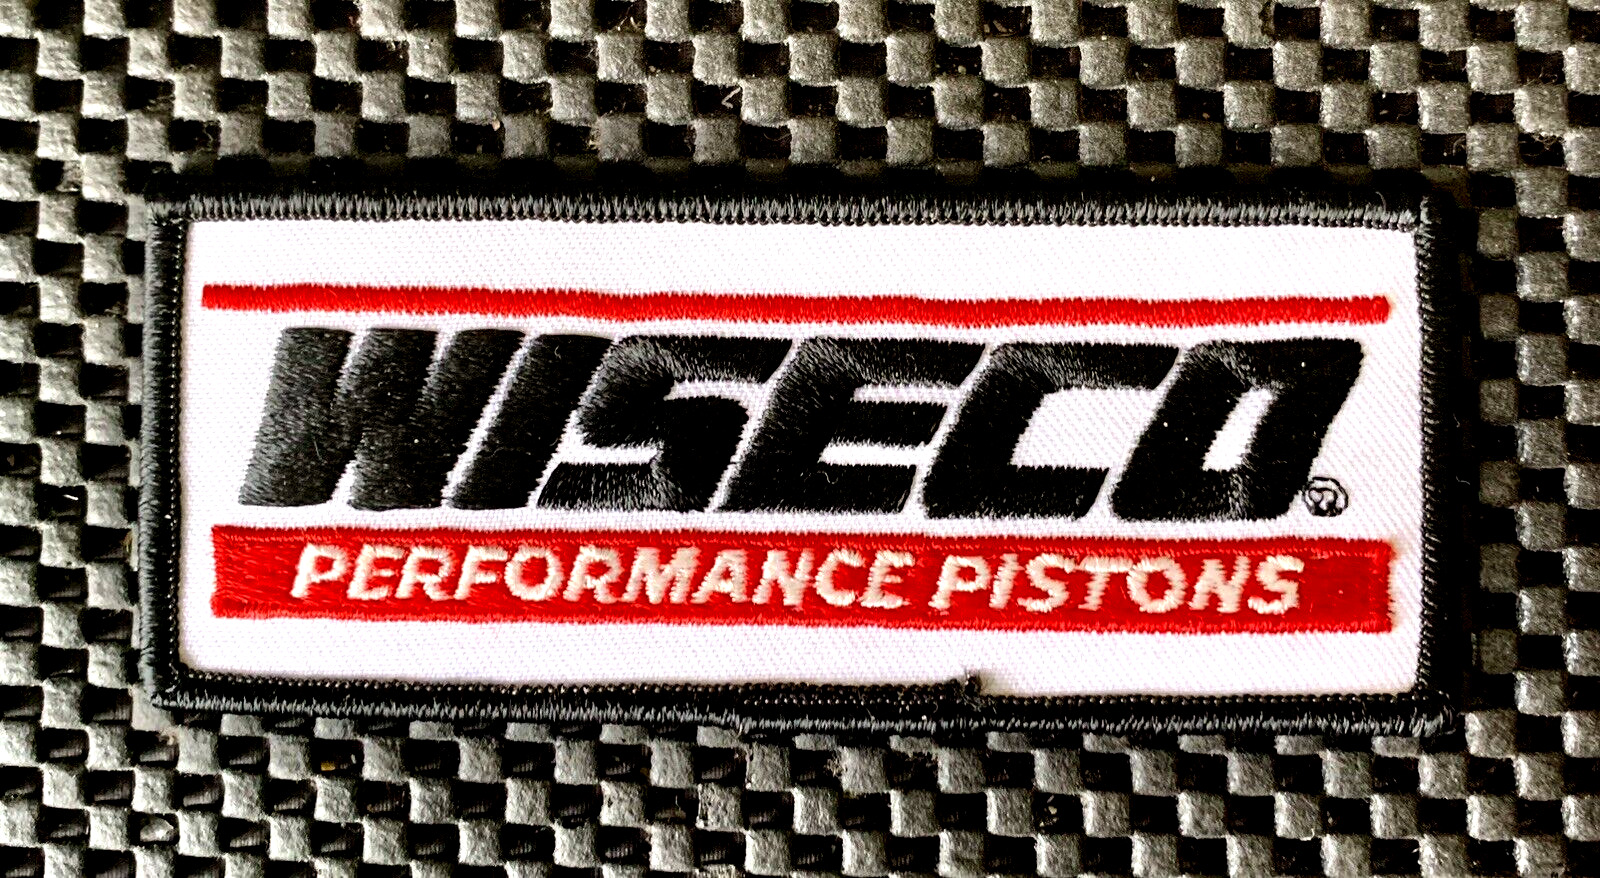 WISECO PERFORMANCE PISTONS EMBROIDERED SEW ON PATCH AUTOMOTIVE 4 3/4